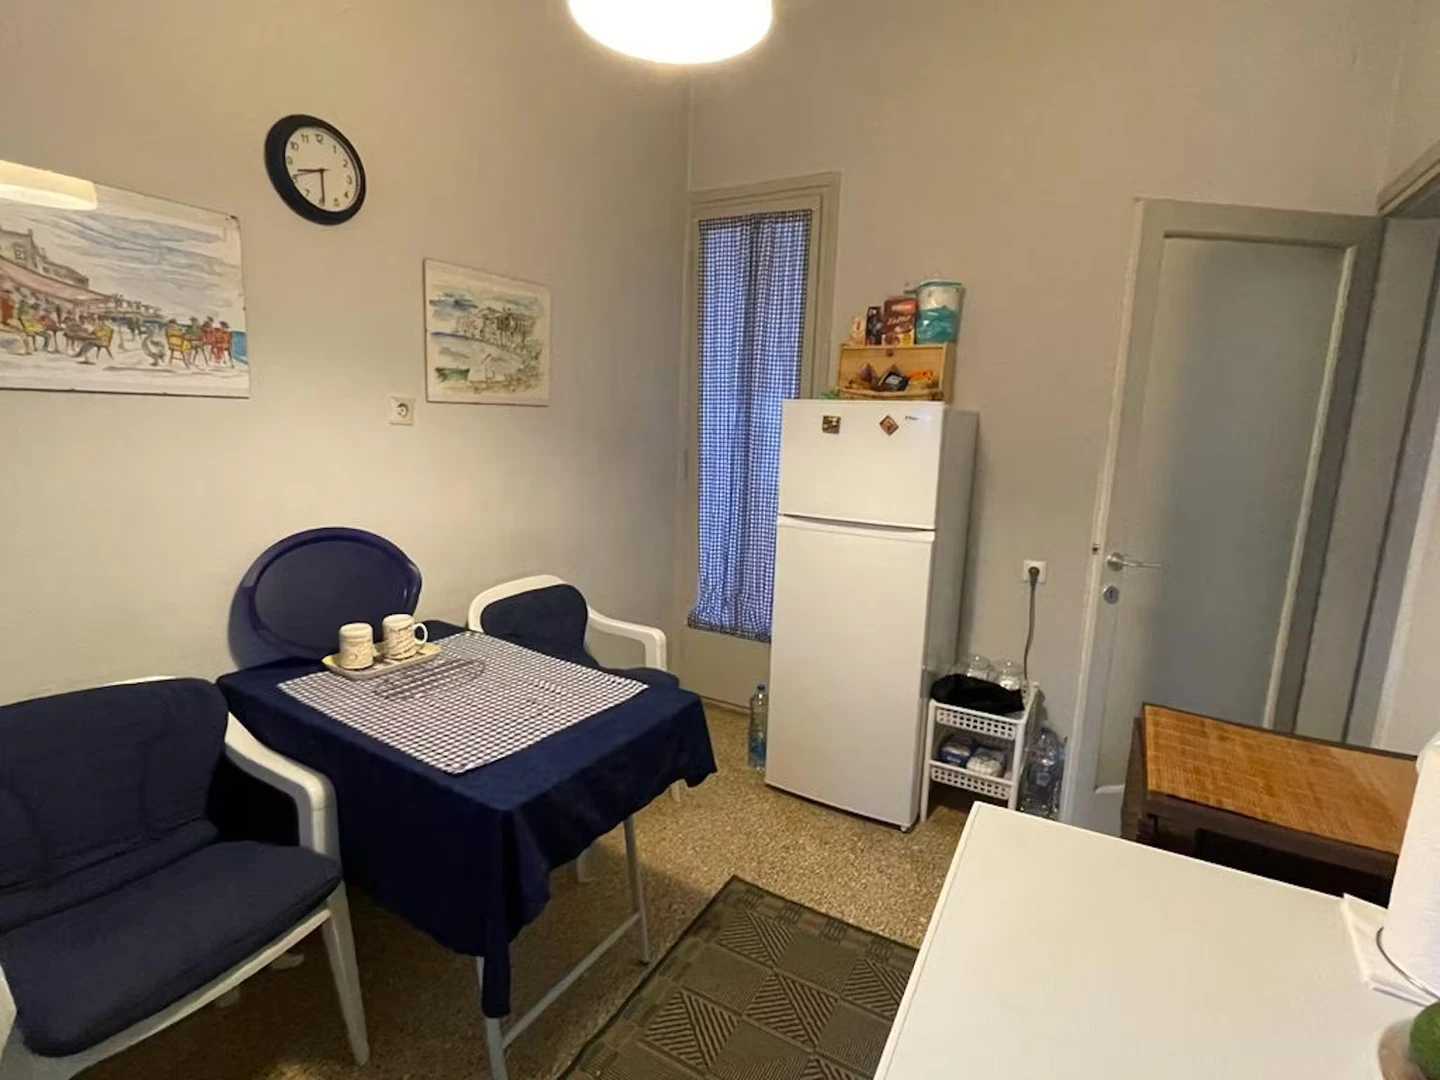 Renting rooms by the month in Thessaloniki